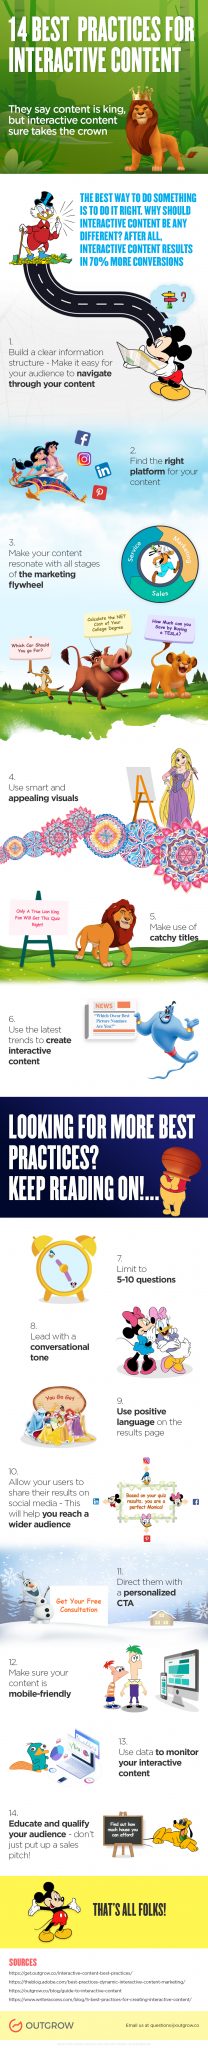 14 Best Practices For Interactive Content [Infographic]